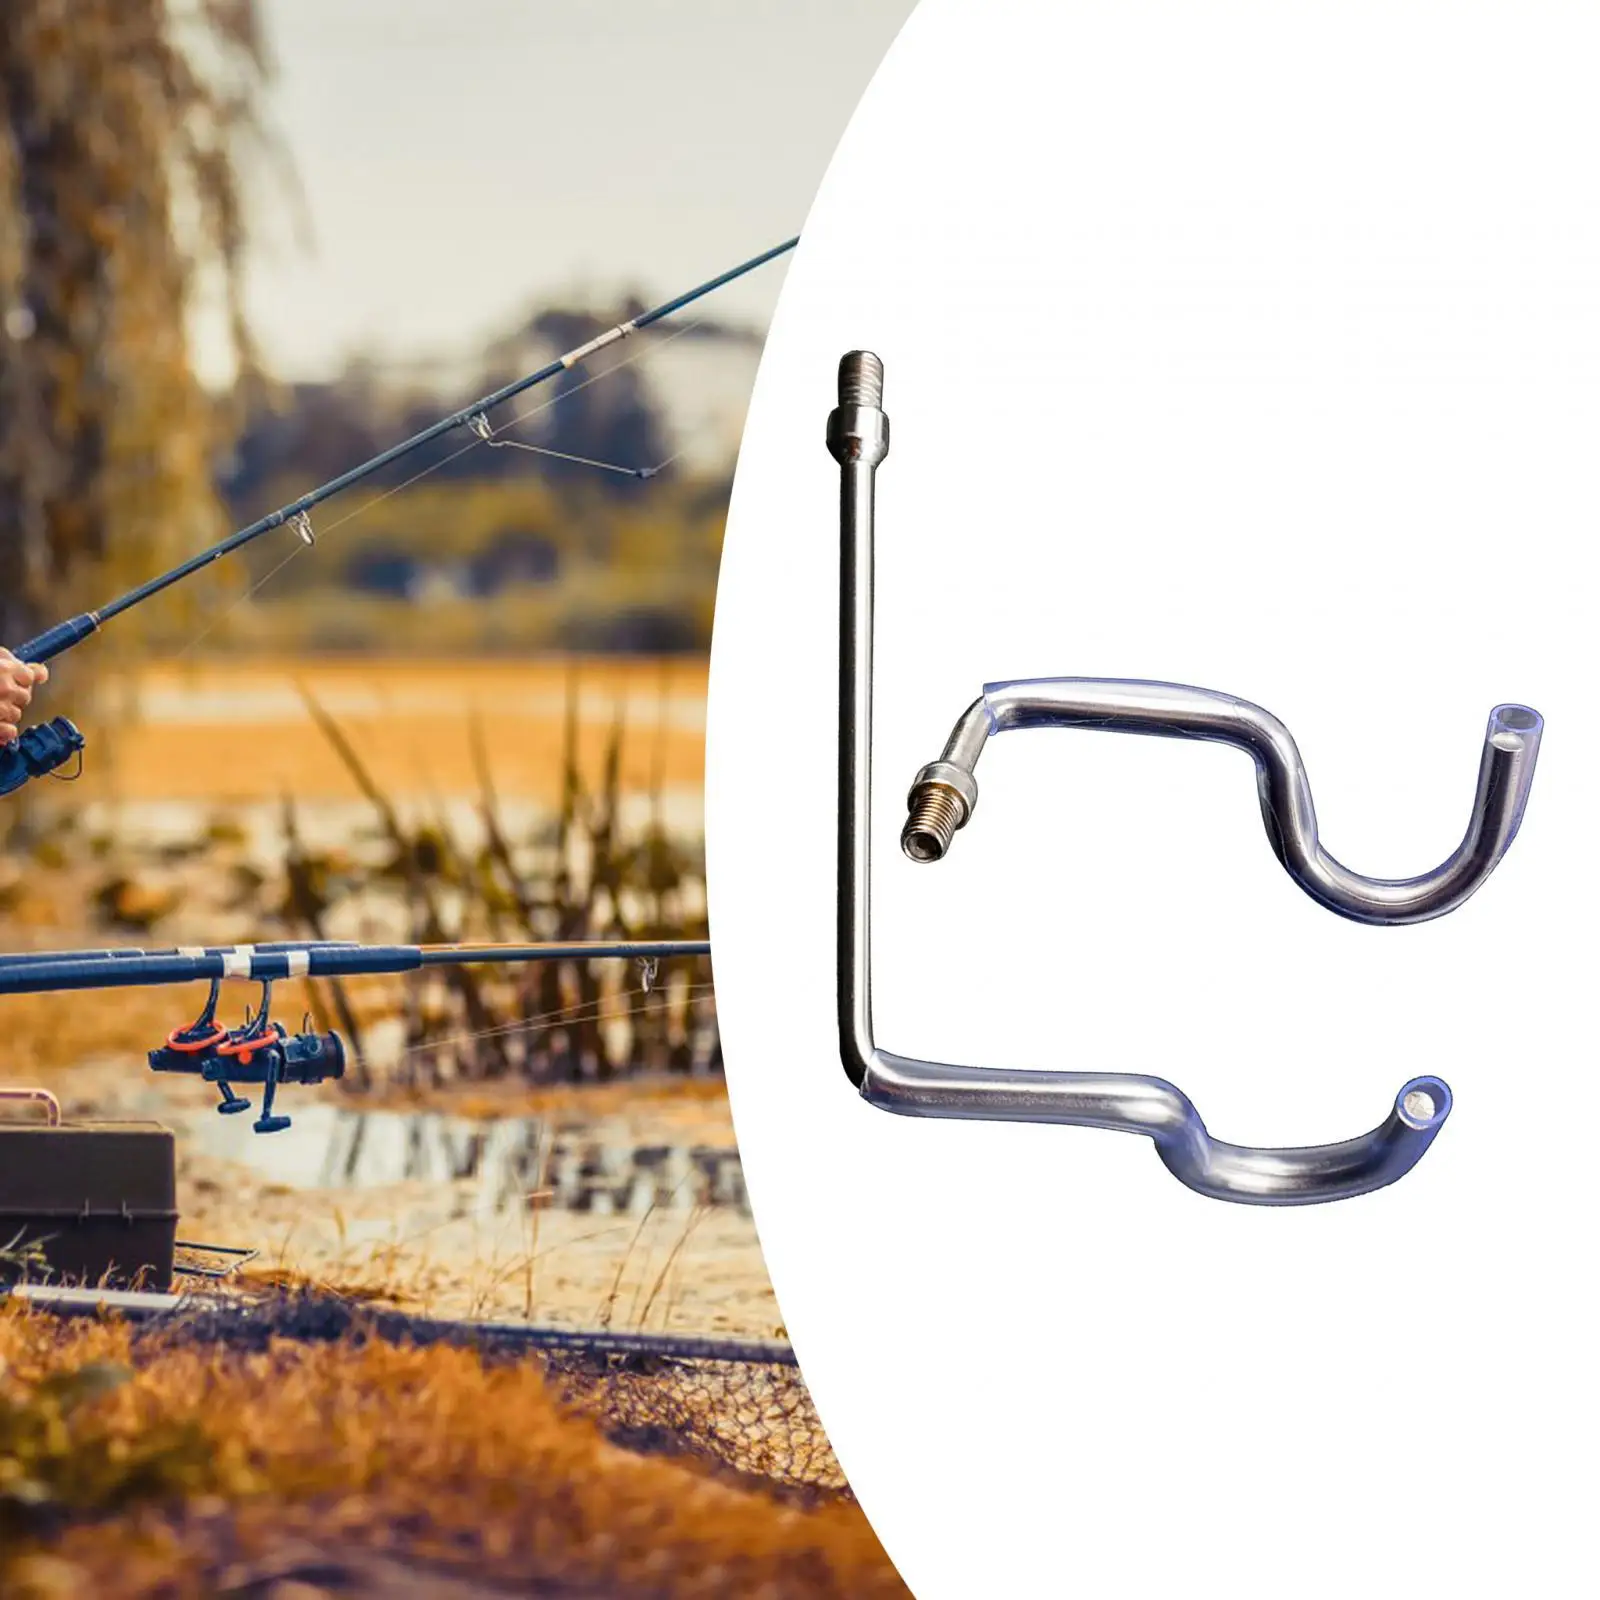 Fishing Pole Bracket Reusable Gifts Fish Rod Stand Rear Hanging Bracket for Outdoor Activities Fishing Travel Picnic Accessories